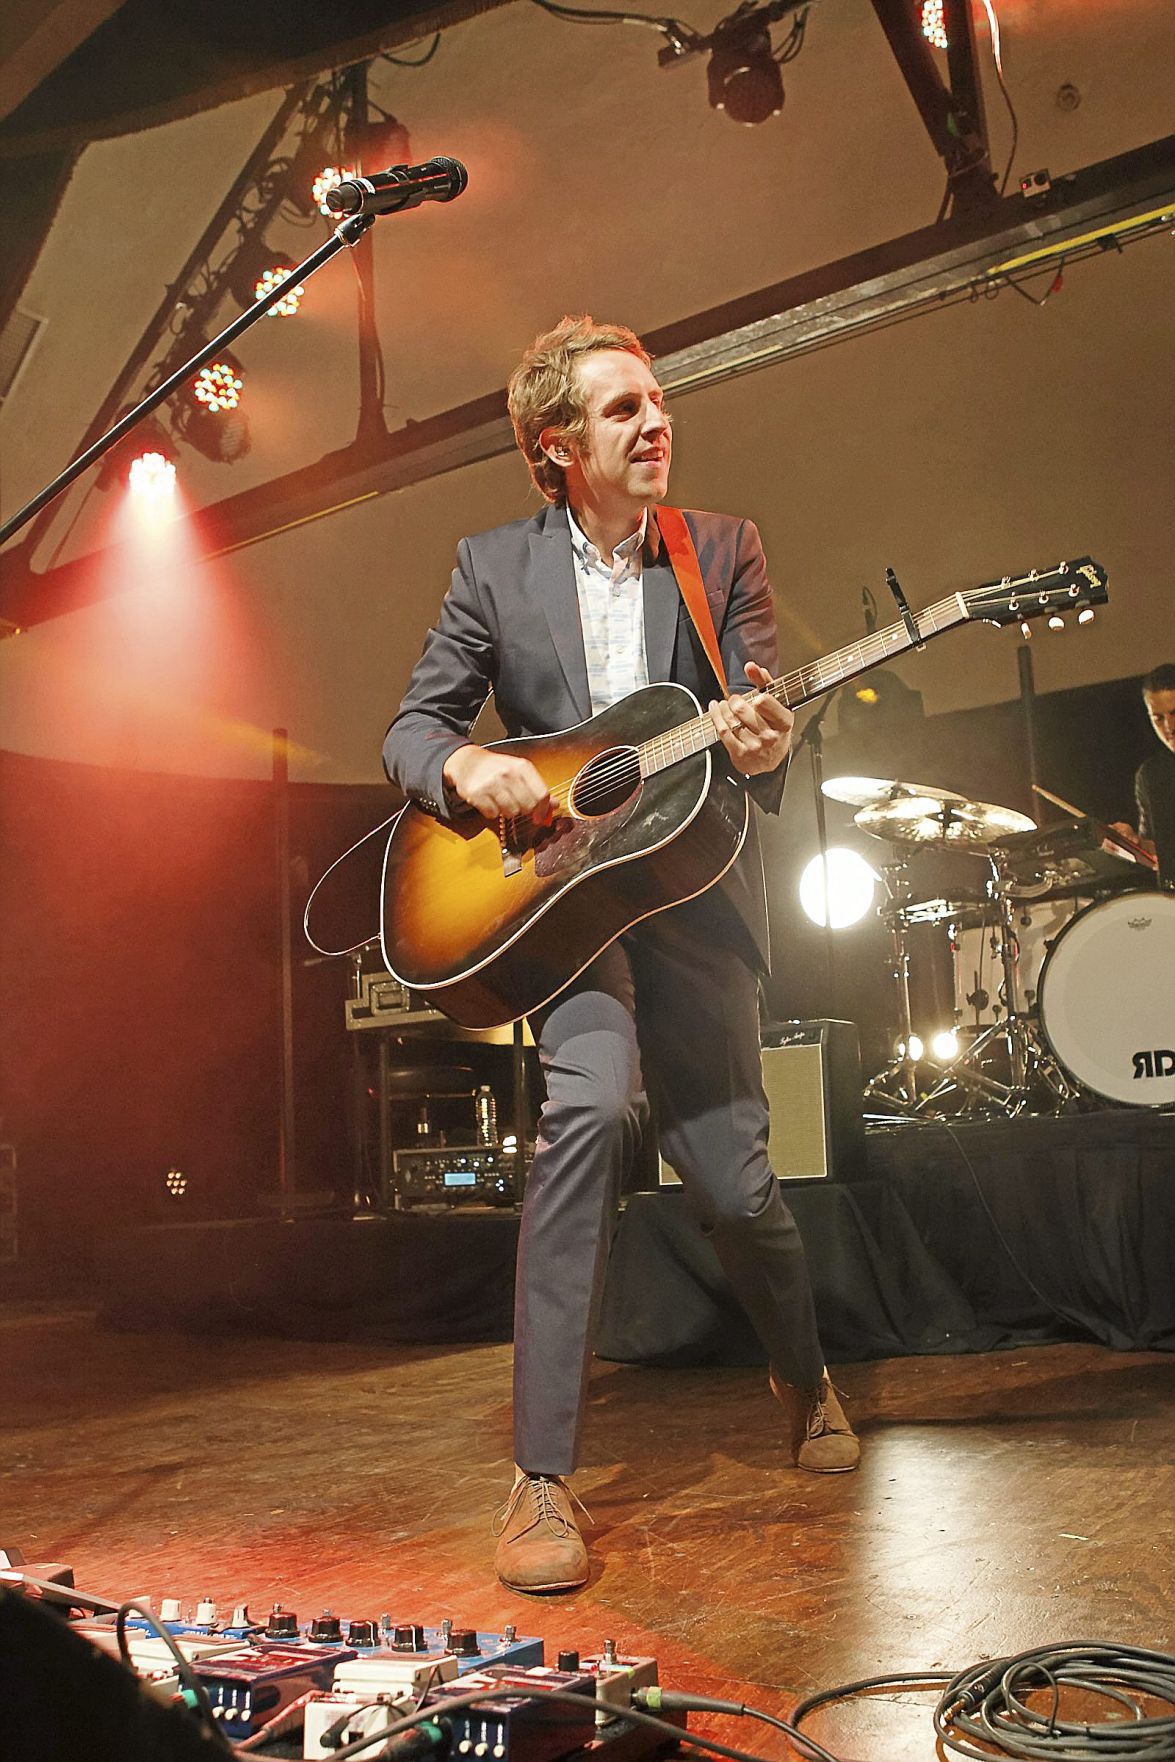 Tulsa native Ben Rector brings his 'biggest tour' to Brady Theater